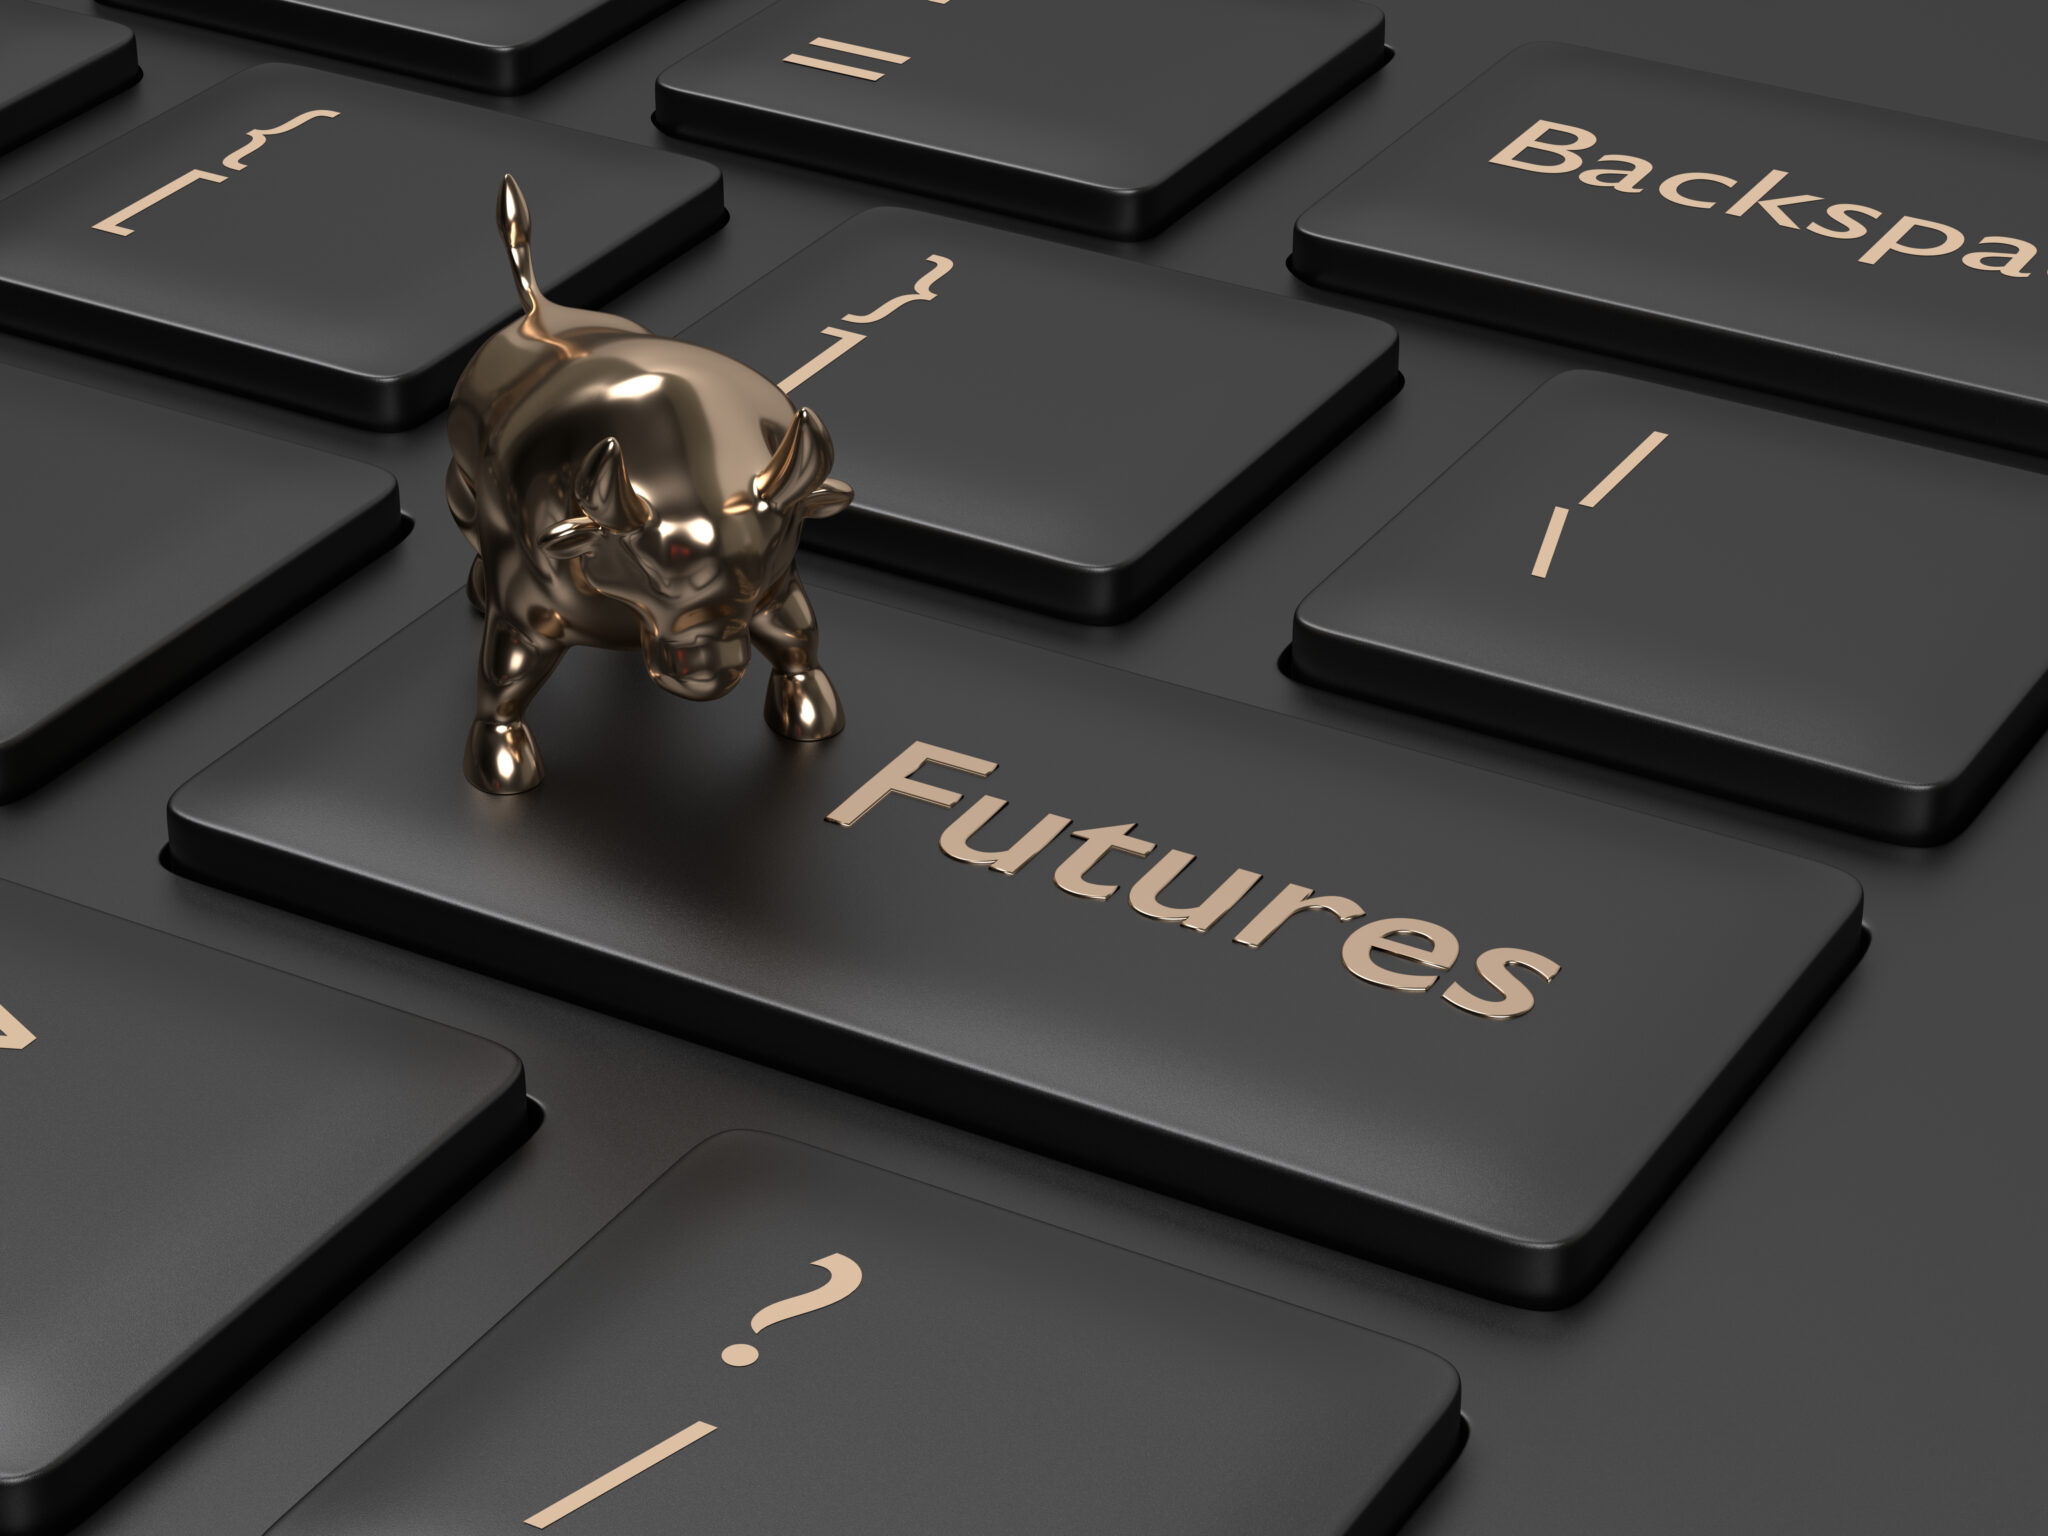 3d render of computer keyboard with FUTURES button. Stock market issue concept